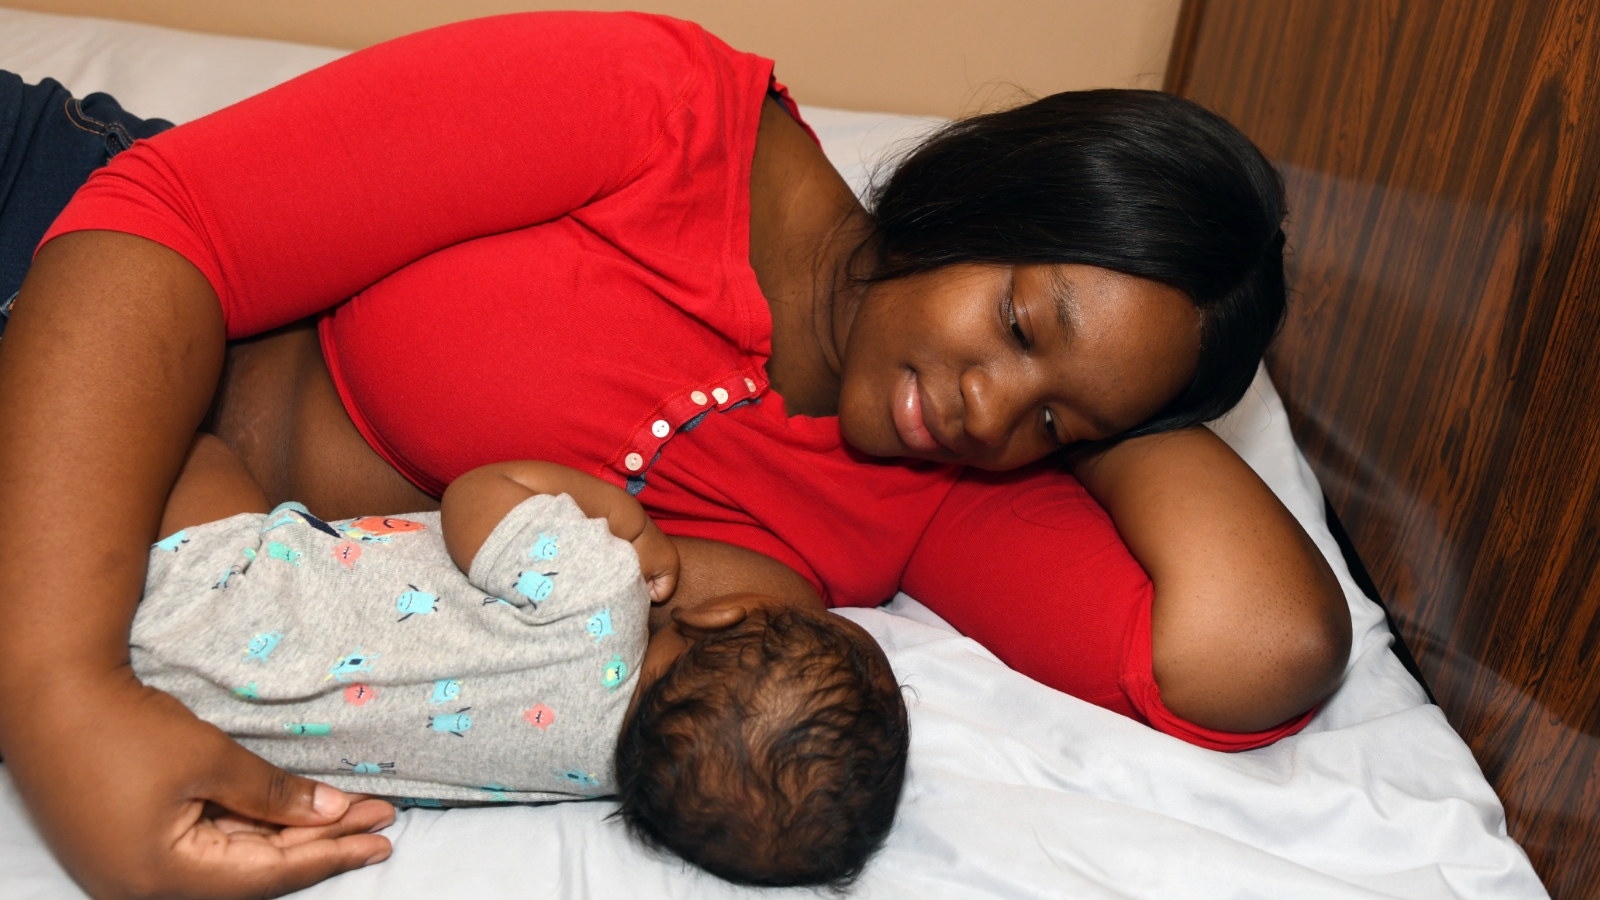 A mother breastfeeds a baby as they lie in bed.